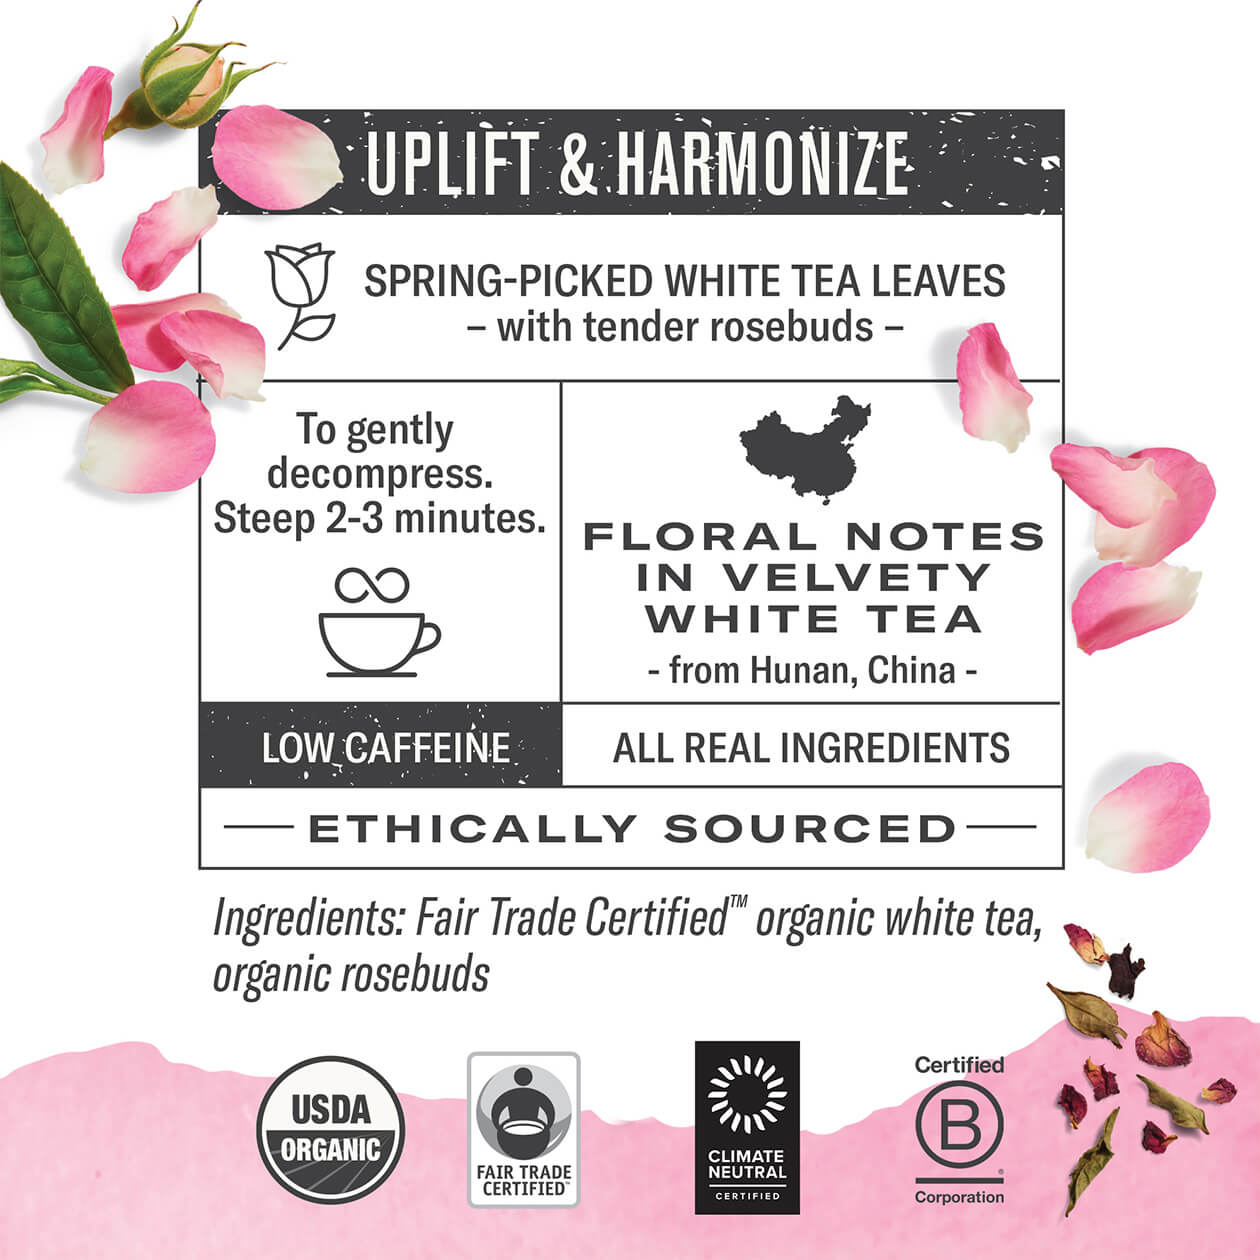 Infographic about White Rose: steep 2-3 minutes, origin: Hunan China, low caffeine, all real ingredients, ethically sourced